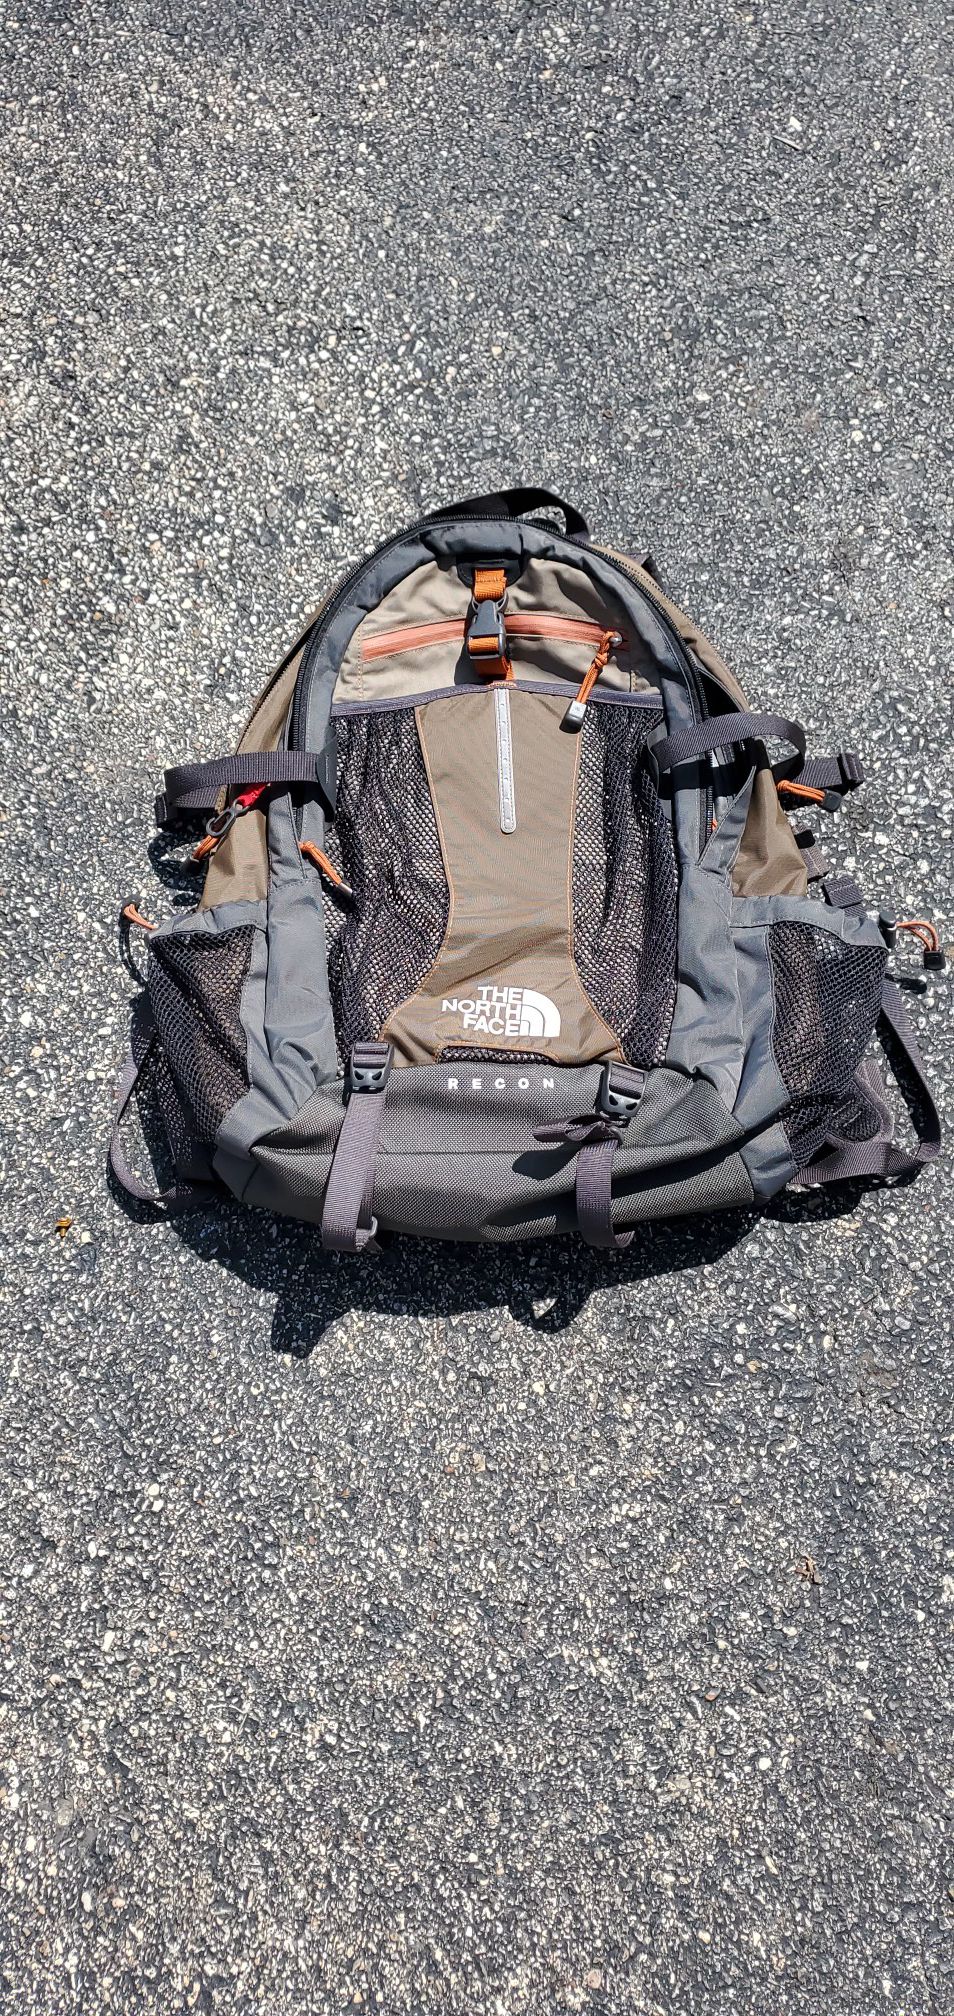 Genuine northface Recon backpack